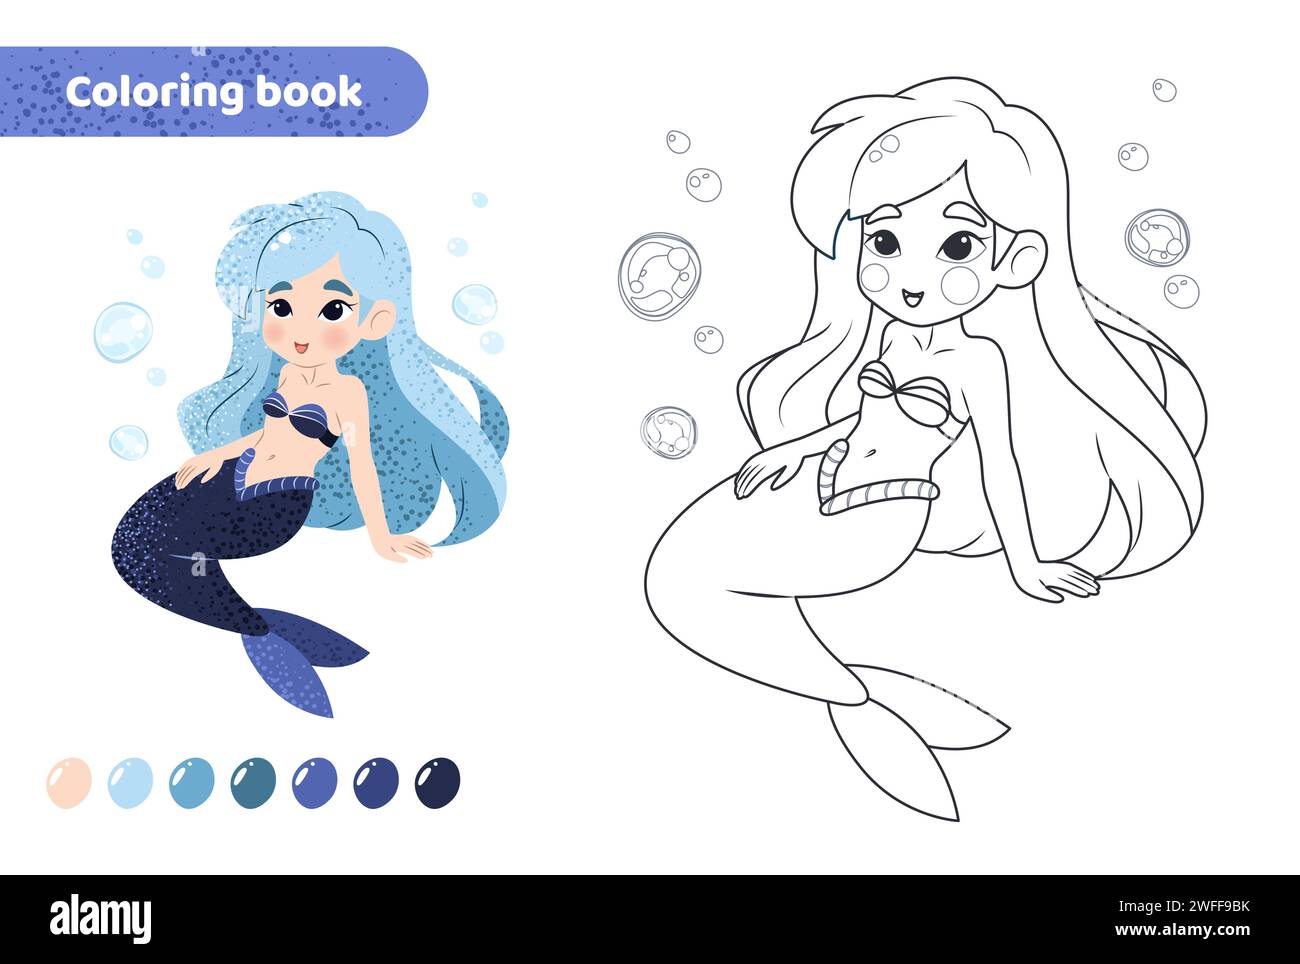 Coloring book for kids. Cute mermaid with bubbles. Stock Vector